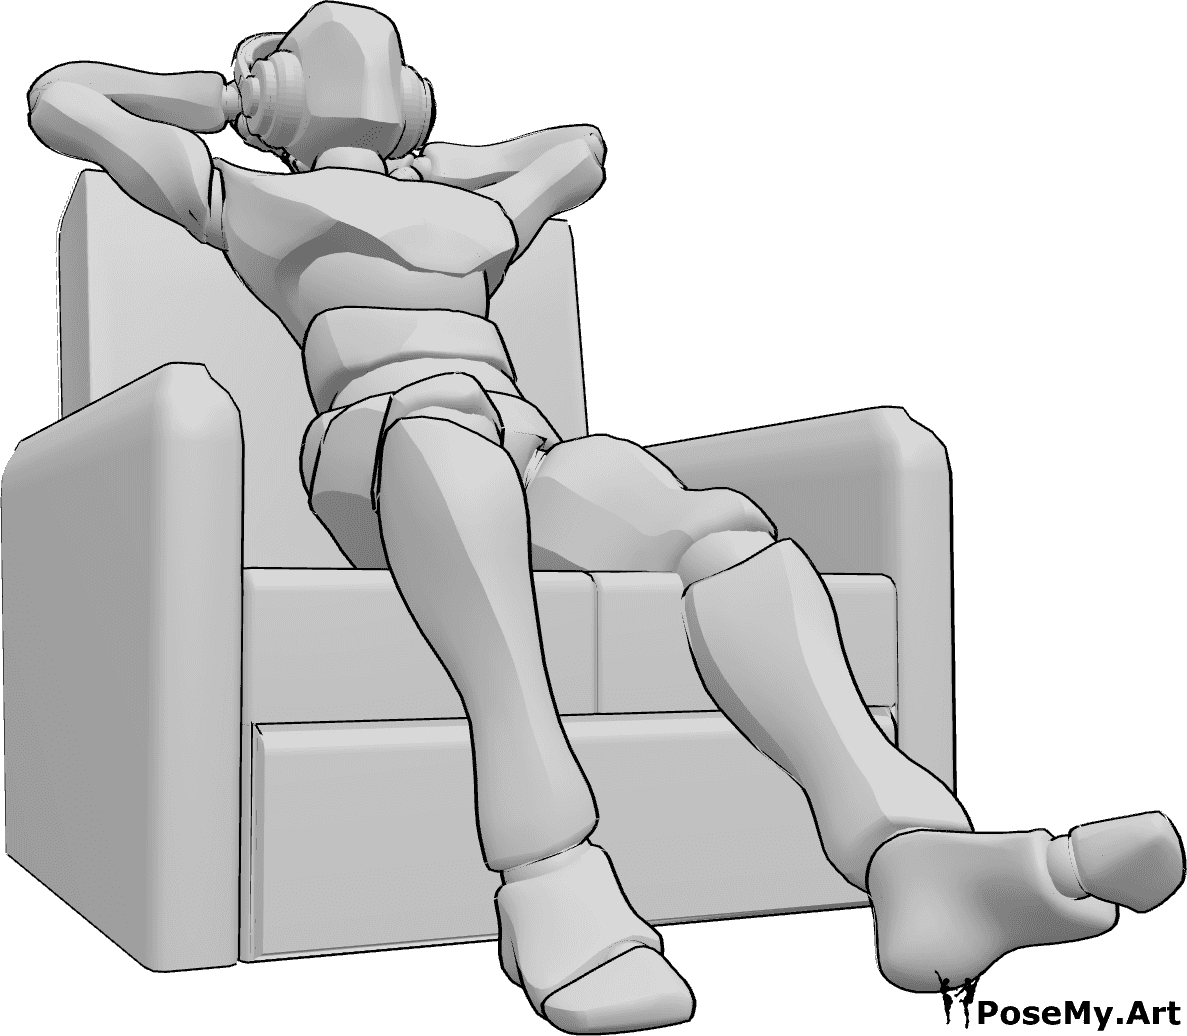 Pose Reference- Sitting listening music pose - Male is sitting comfortably on the couch and listening to music on headphones